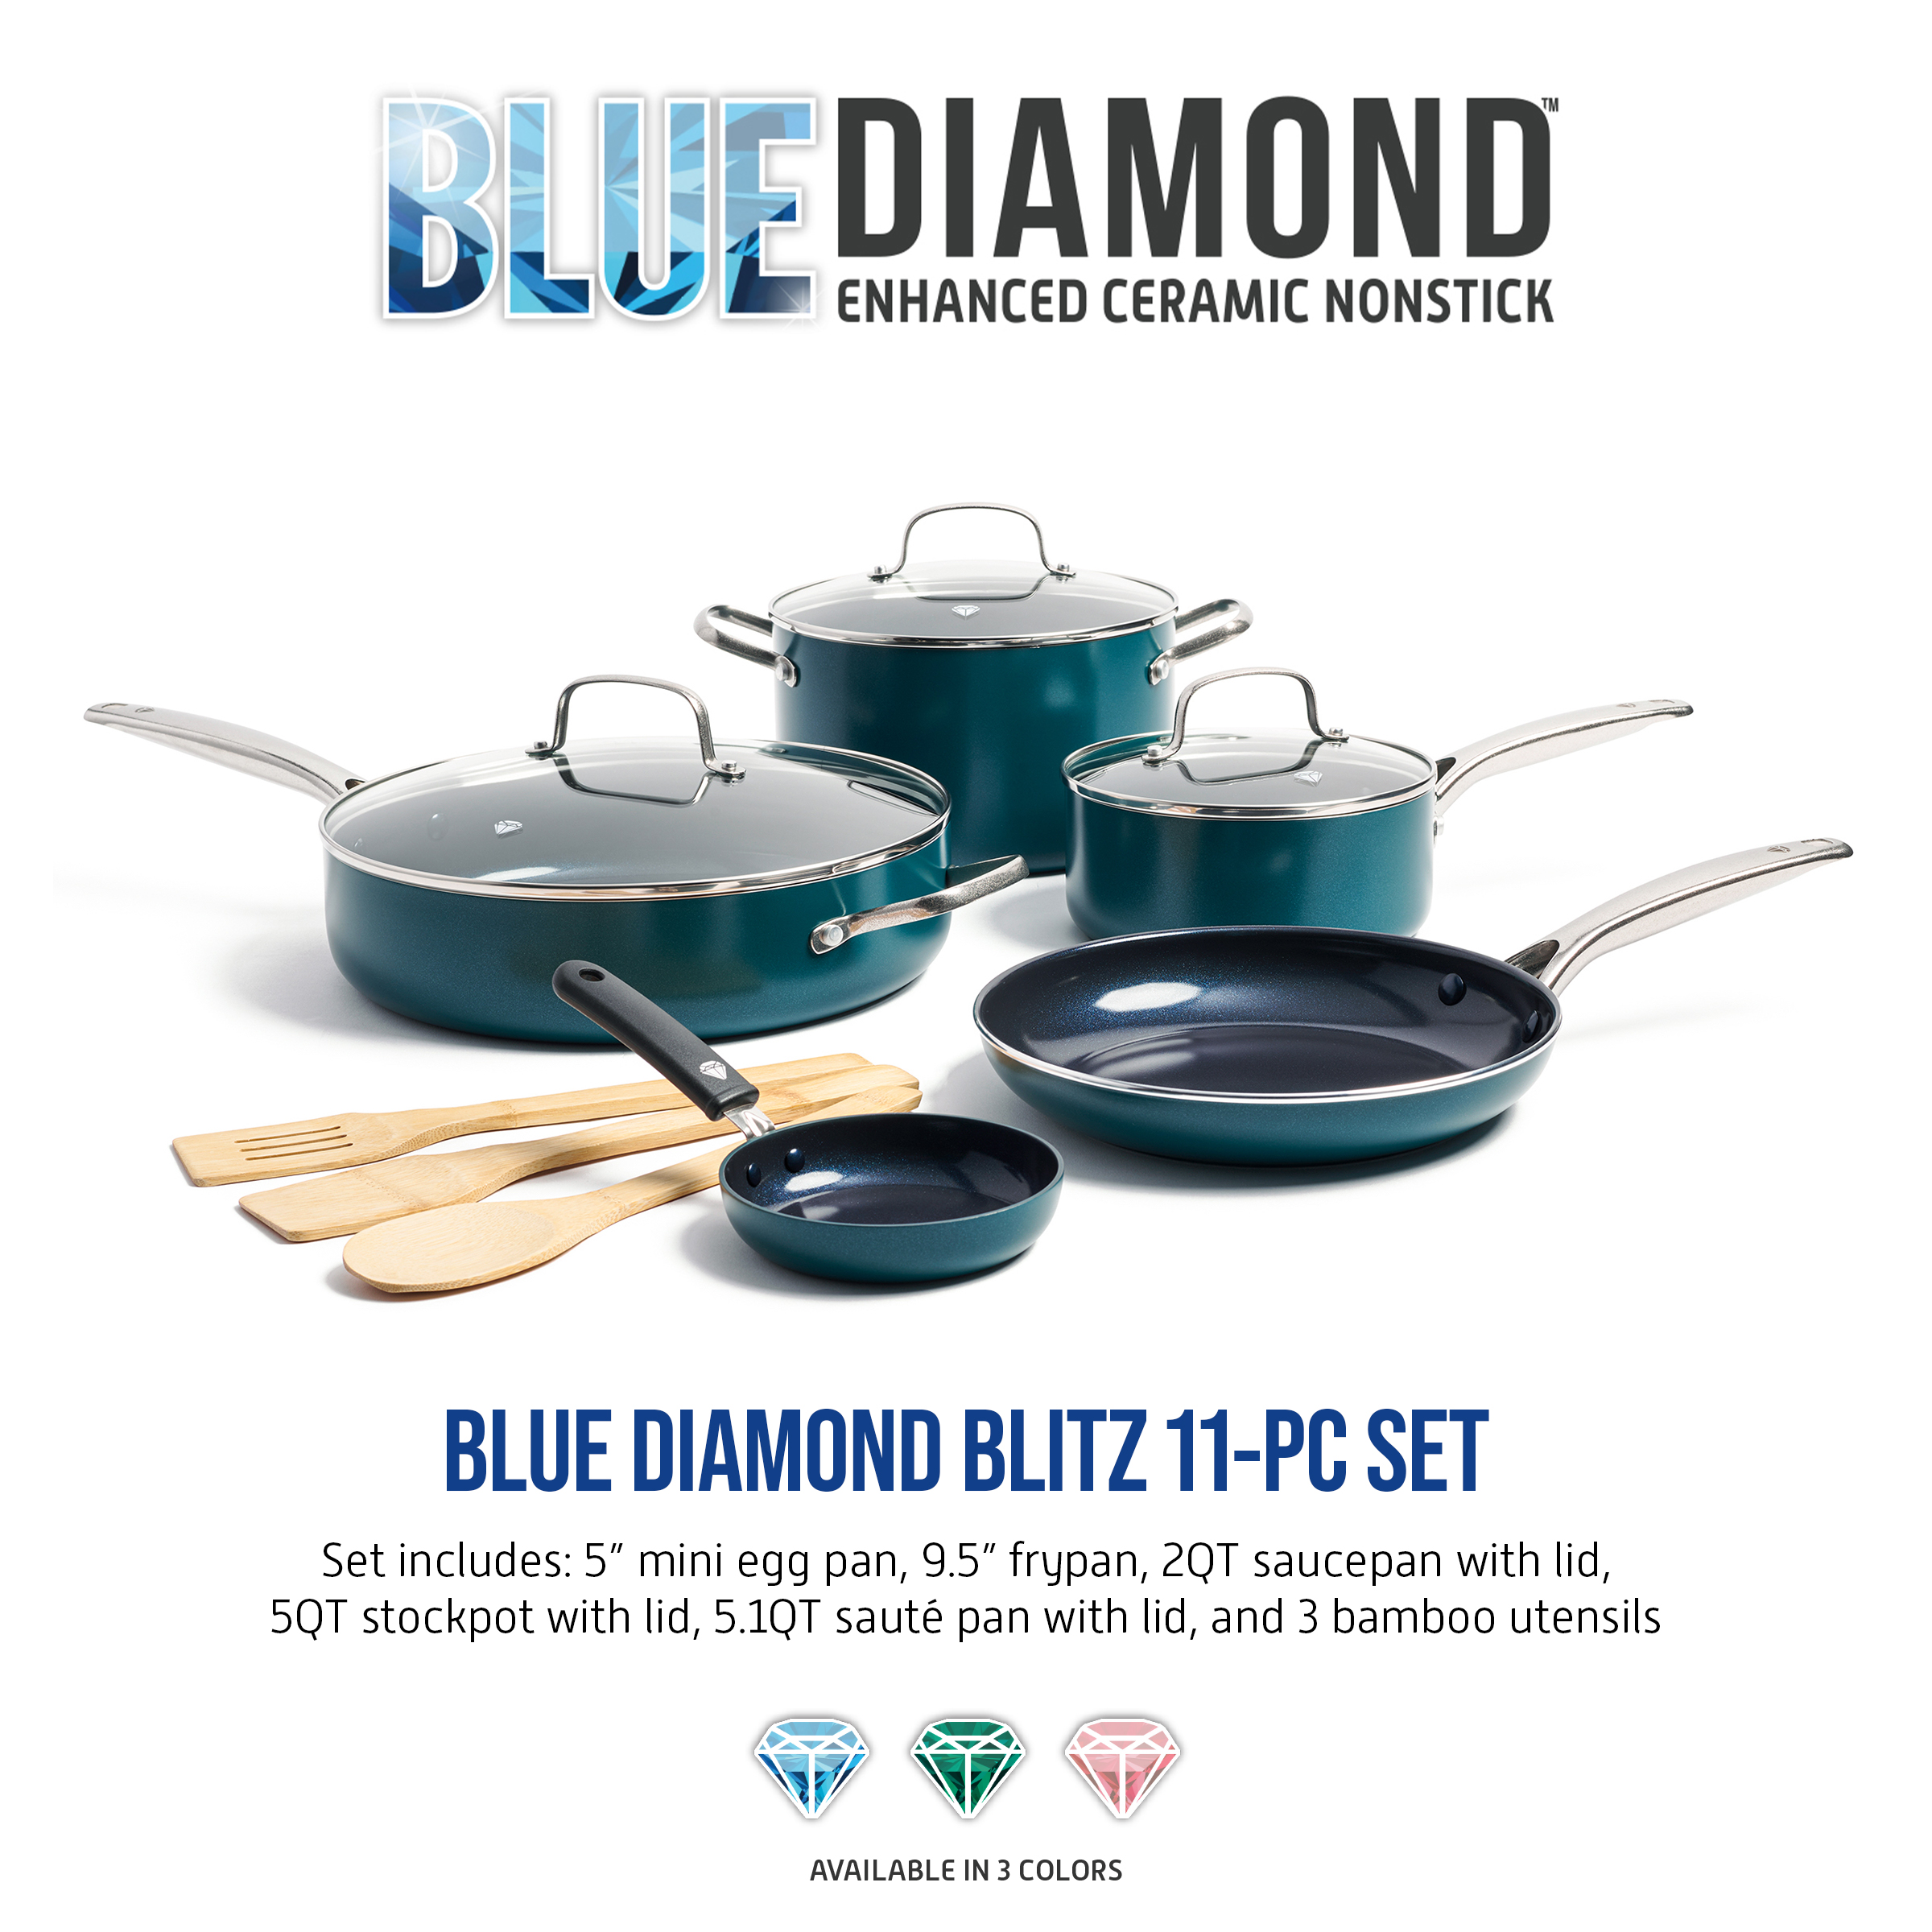 Blue Diamond Green Limited Edition Nonstick Ceramic 11-Piece Cookware Set - image 5 of 8